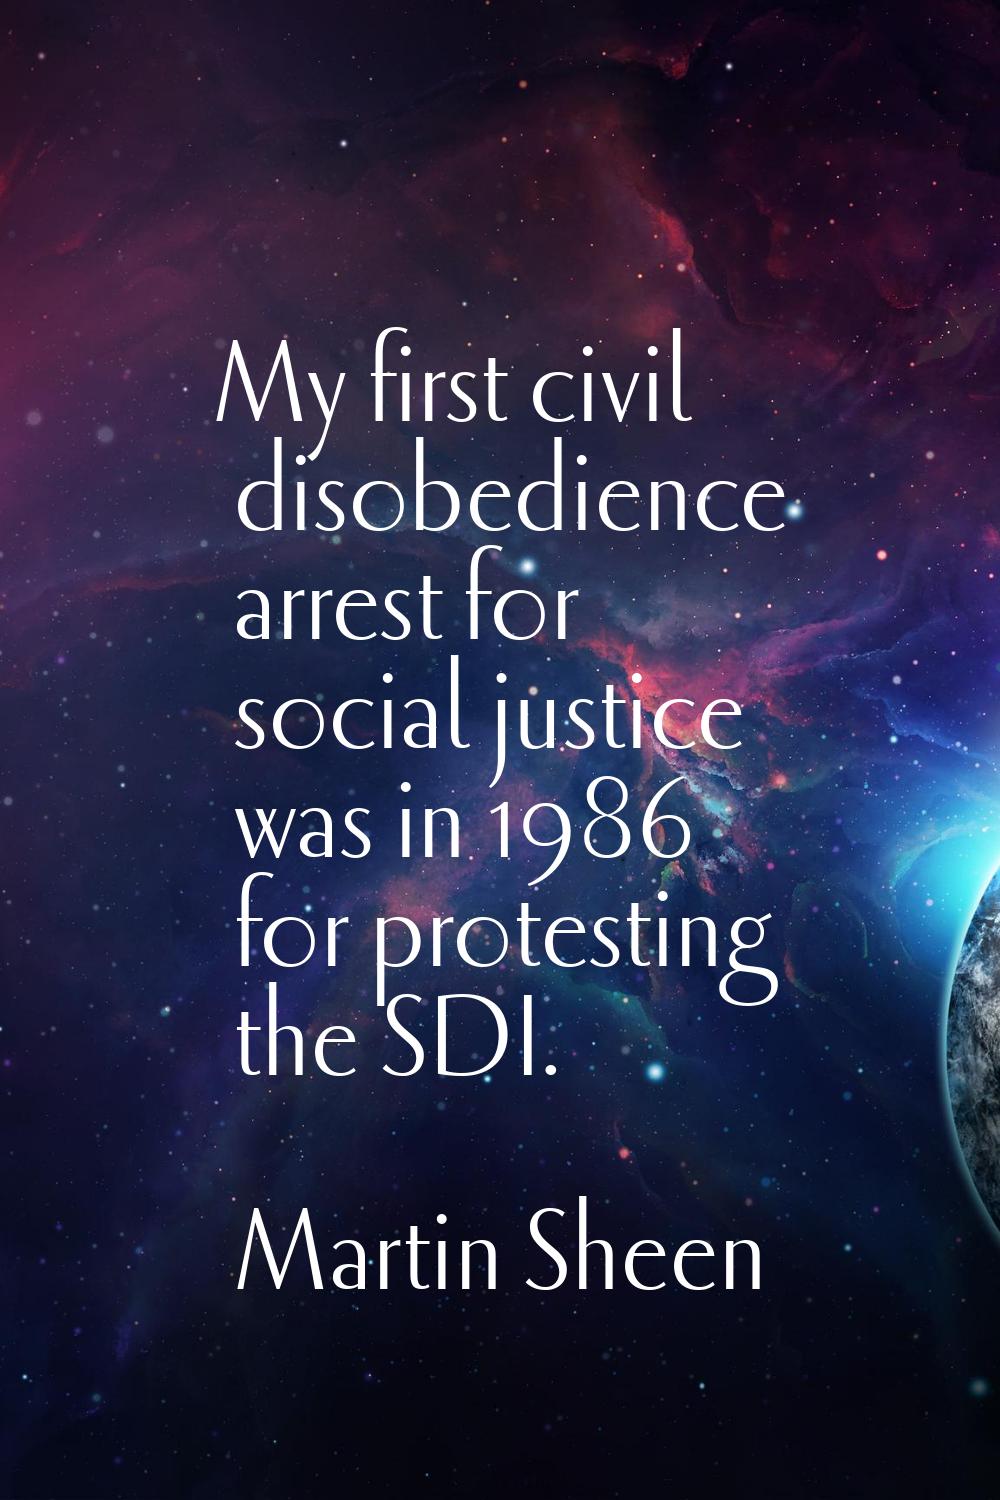 My first civil disobedience arrest for social justice was in 1986 for protesting the SDI.